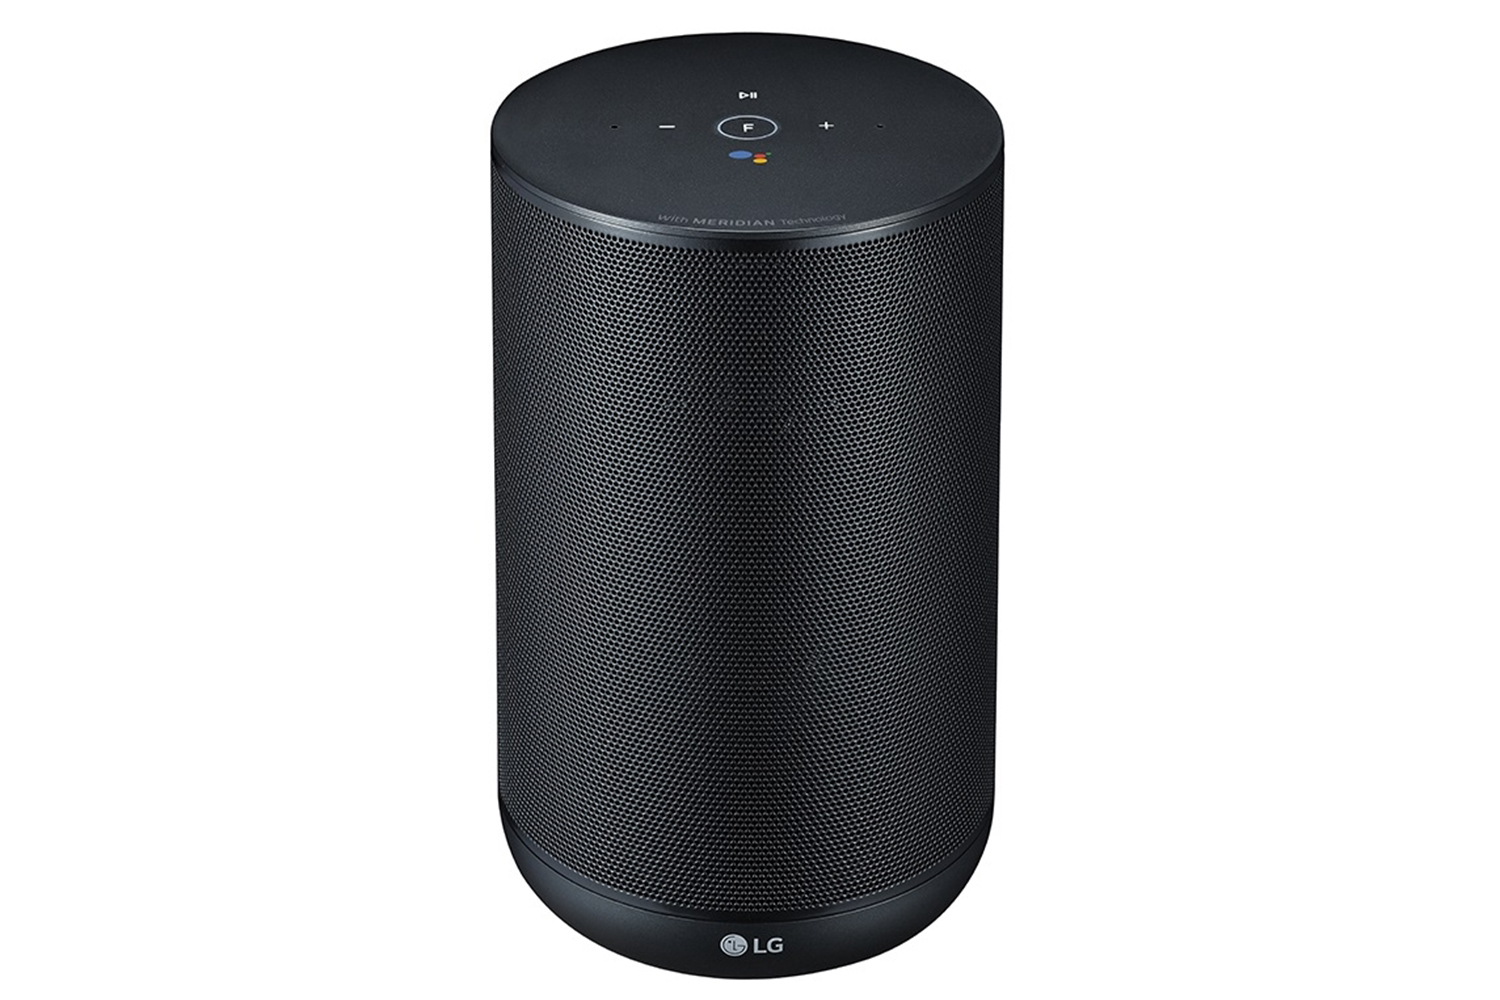 LG ThinQ Home Audio Theater Speaker Google Assistant for sale online 